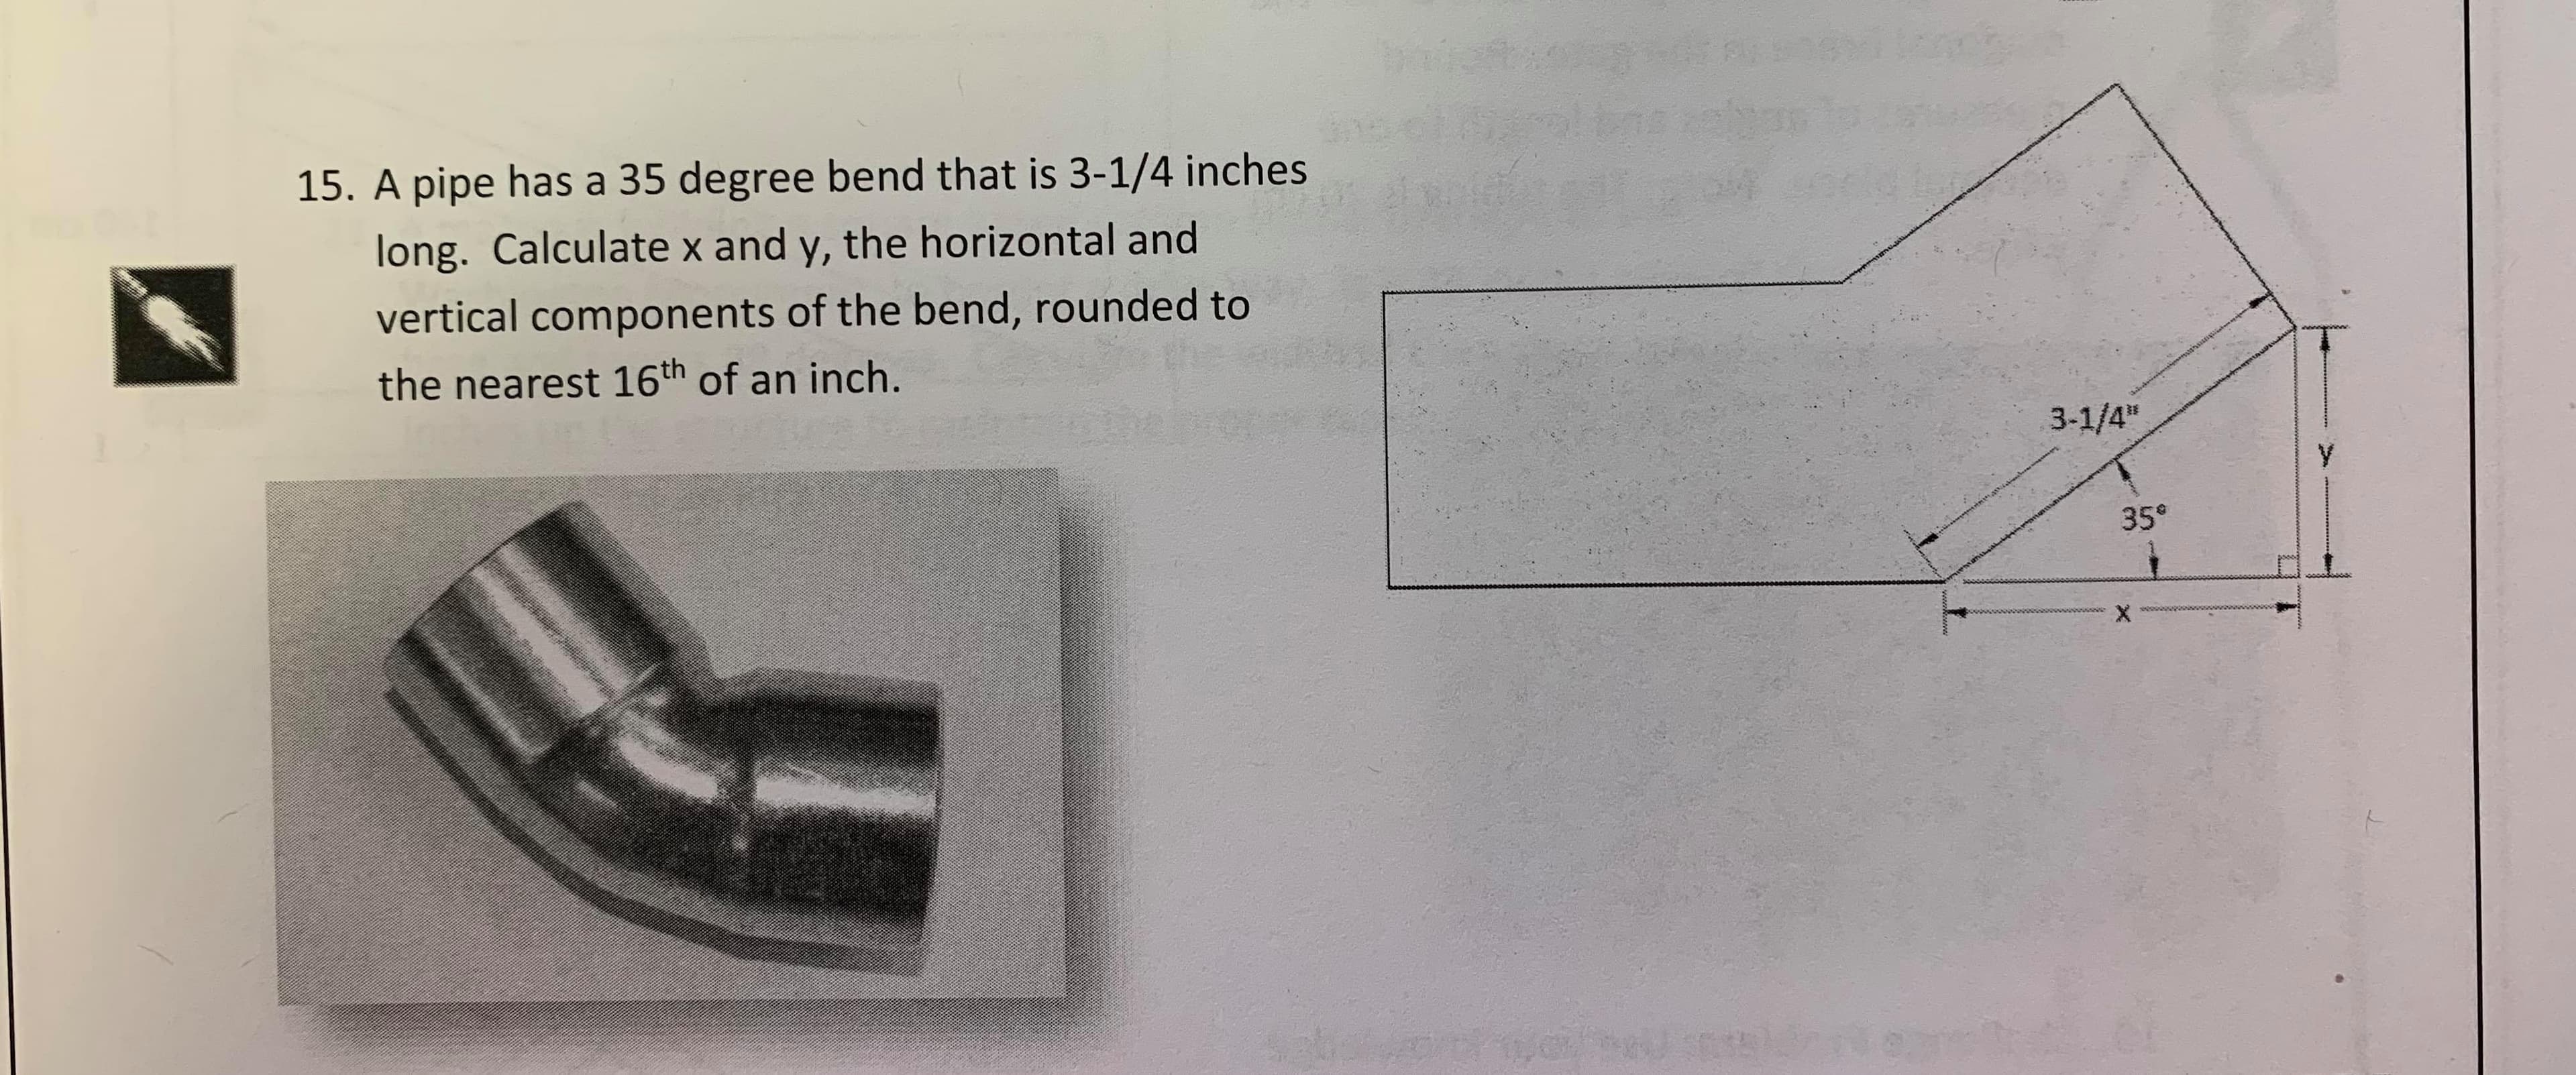 15. A pipe has a 35 degree bend that is 3-1/4 inches
long. Calculate x and y, the horizontal and
vertical components of the bend, rounded to
the nearest 16th of an inch.
3-1/4"
y
35
X
